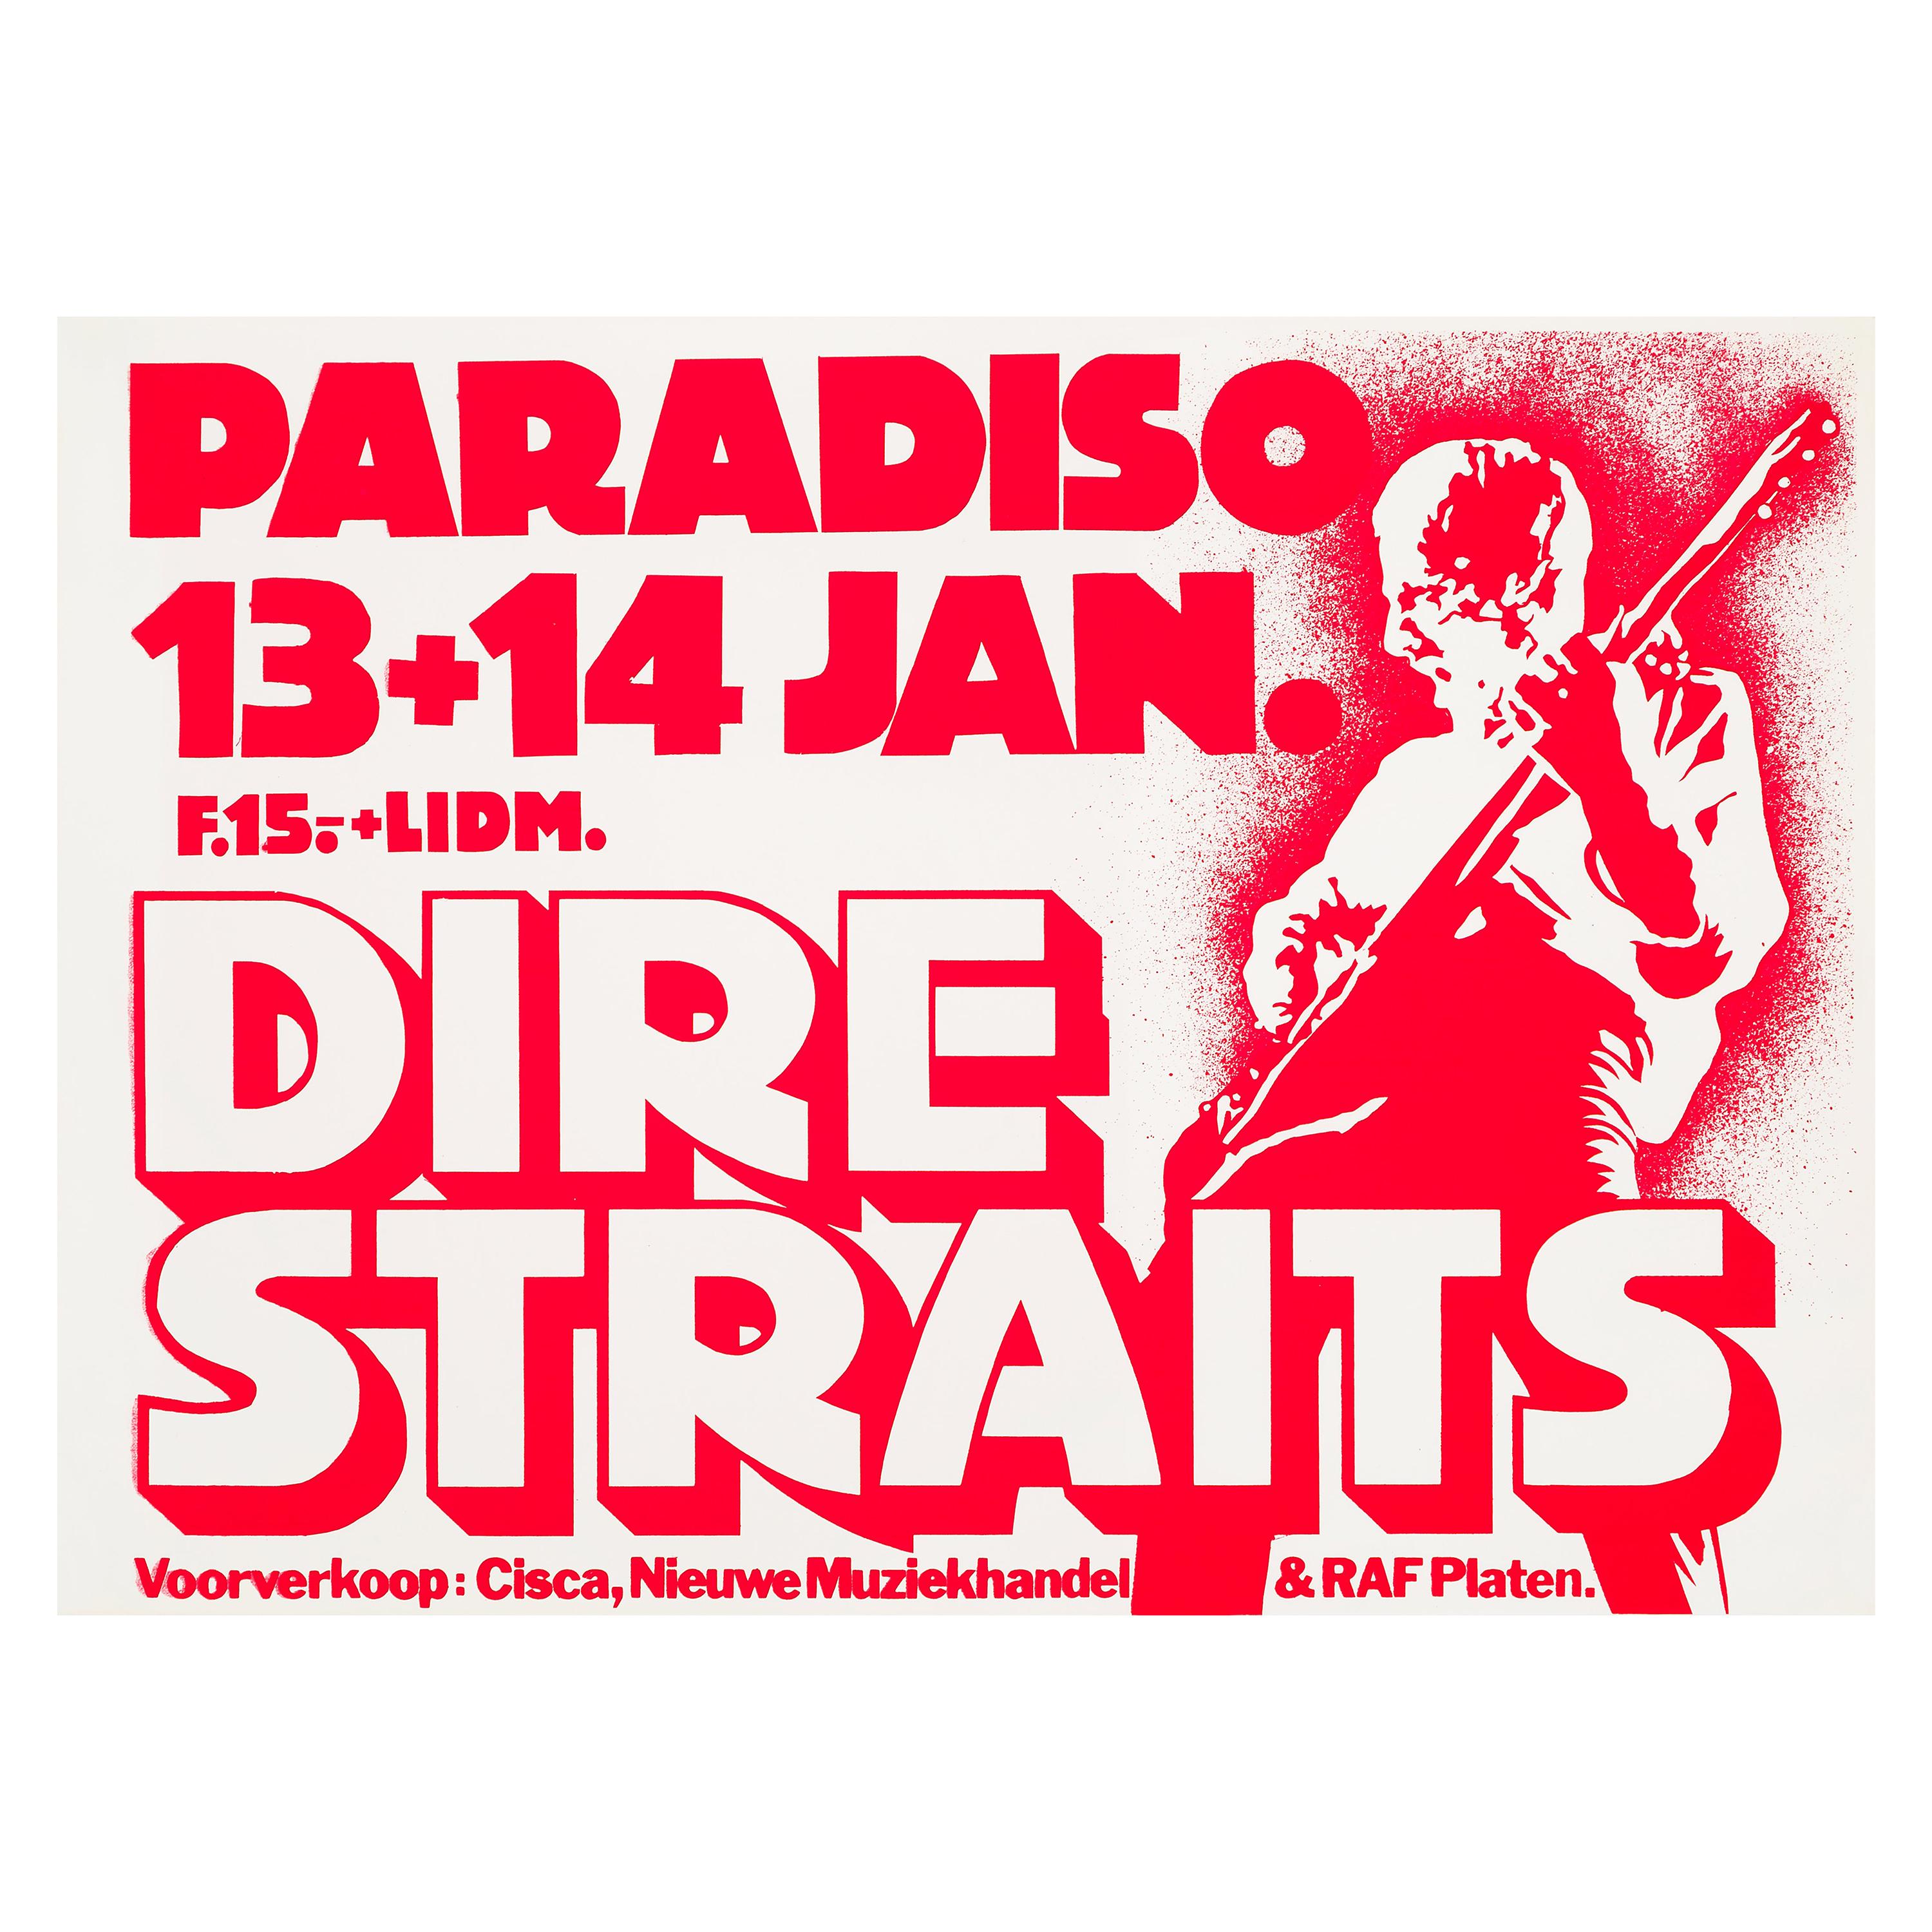 Dire Straits Original Vintage Concert Poster for the Paradiso, Amsterdam, 1981